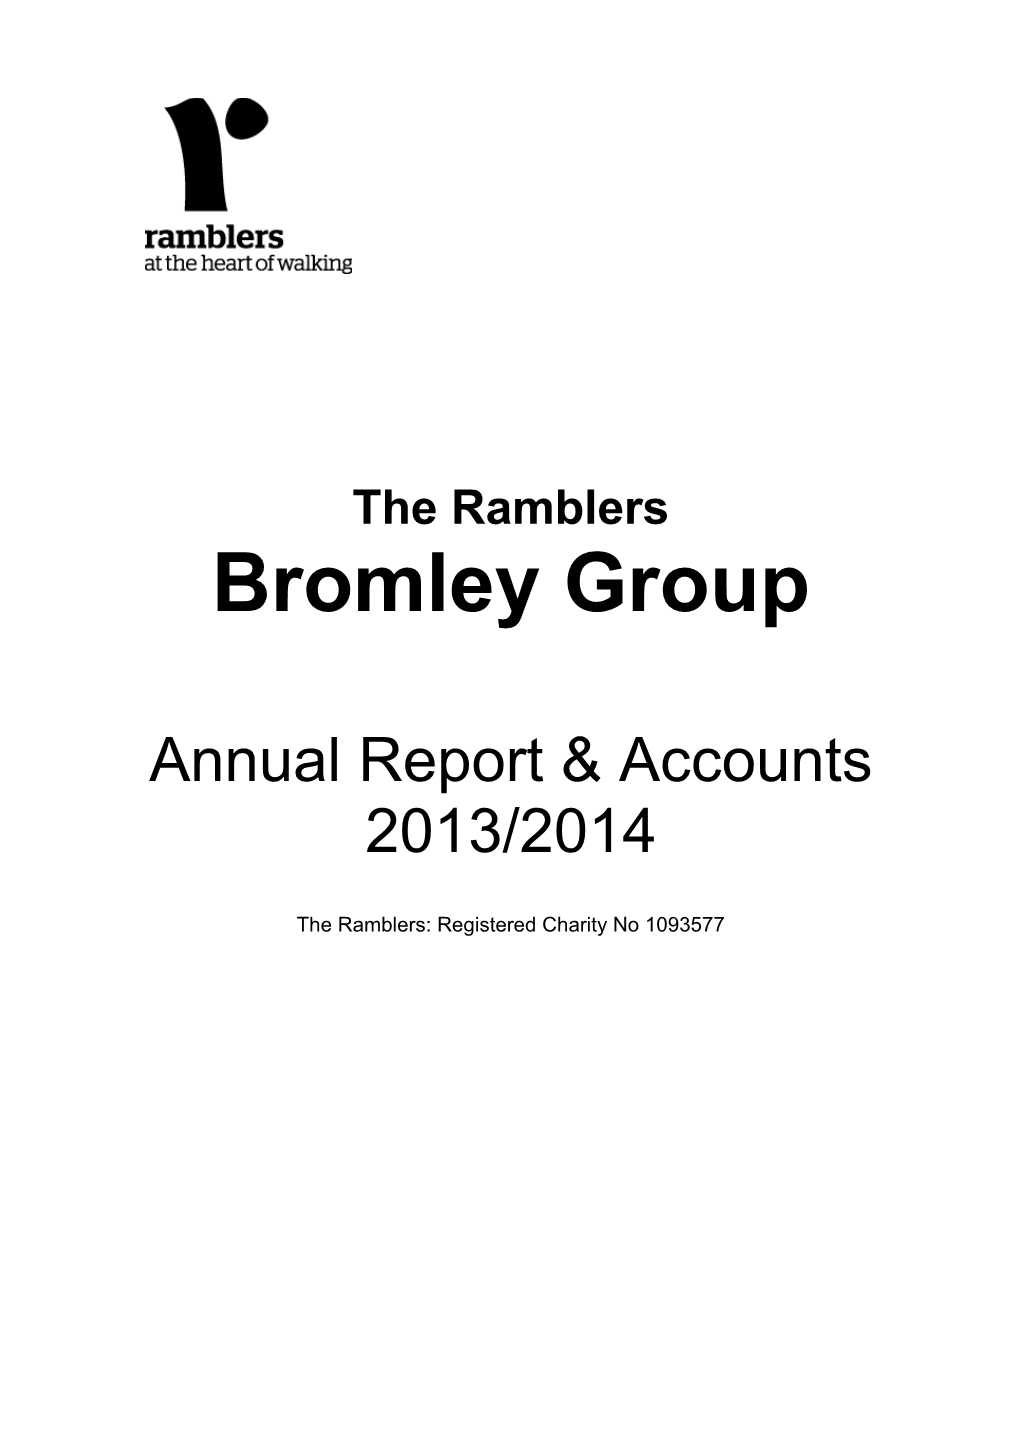 The Ramblers:Registered Charity No 1093577